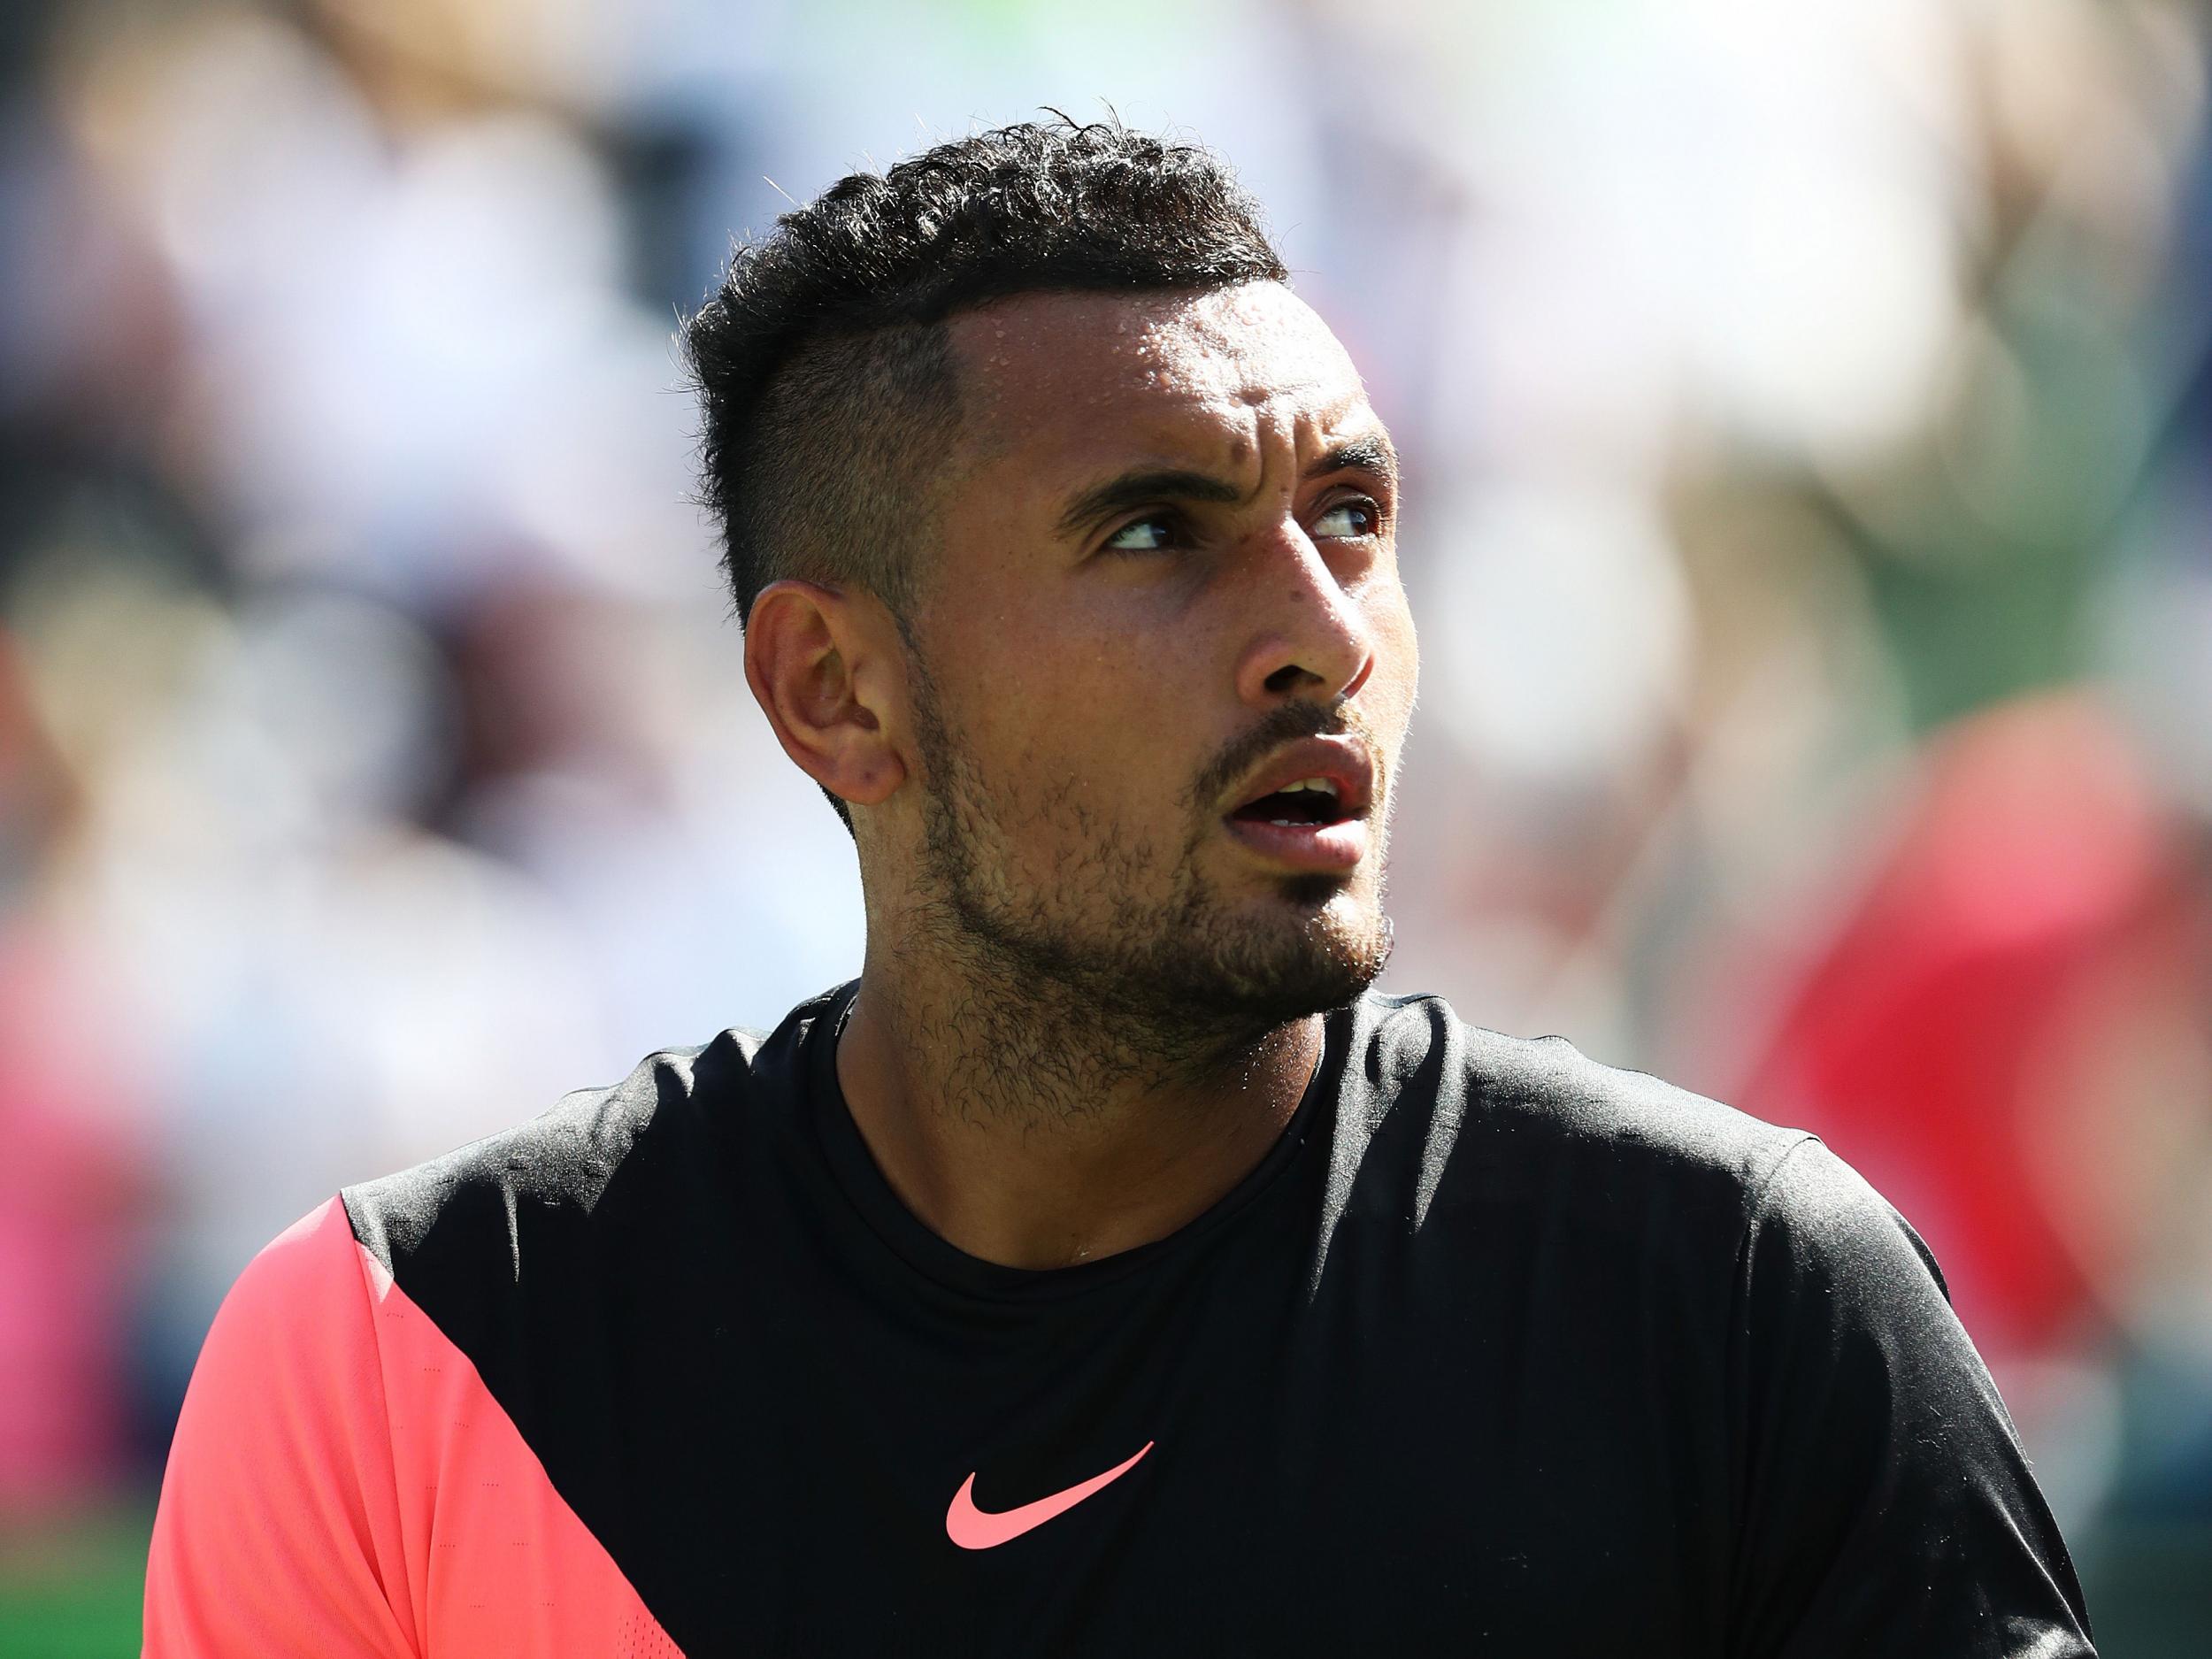 Nick Kyrgios is hitting the headlines off court once again